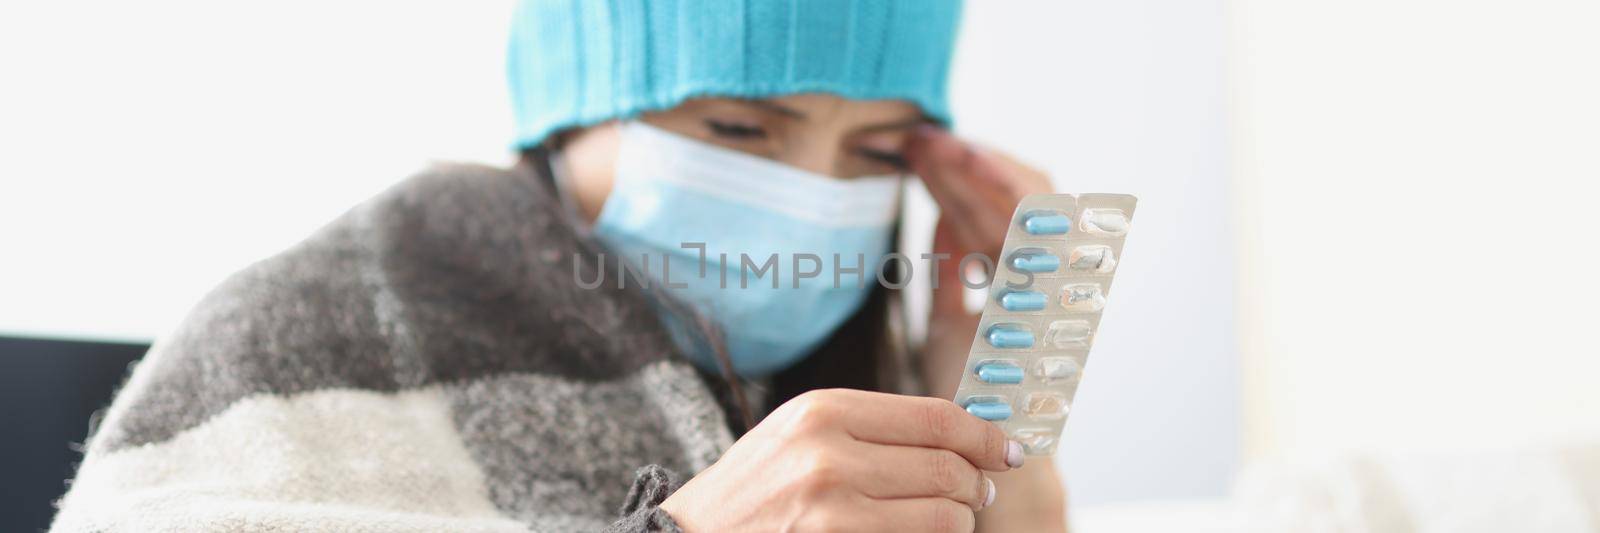 Portrait of woman hold blister with tablets in hand, feeling unwell, bad headache. Female on quarantine at home, self isolation. Health, sickness concept